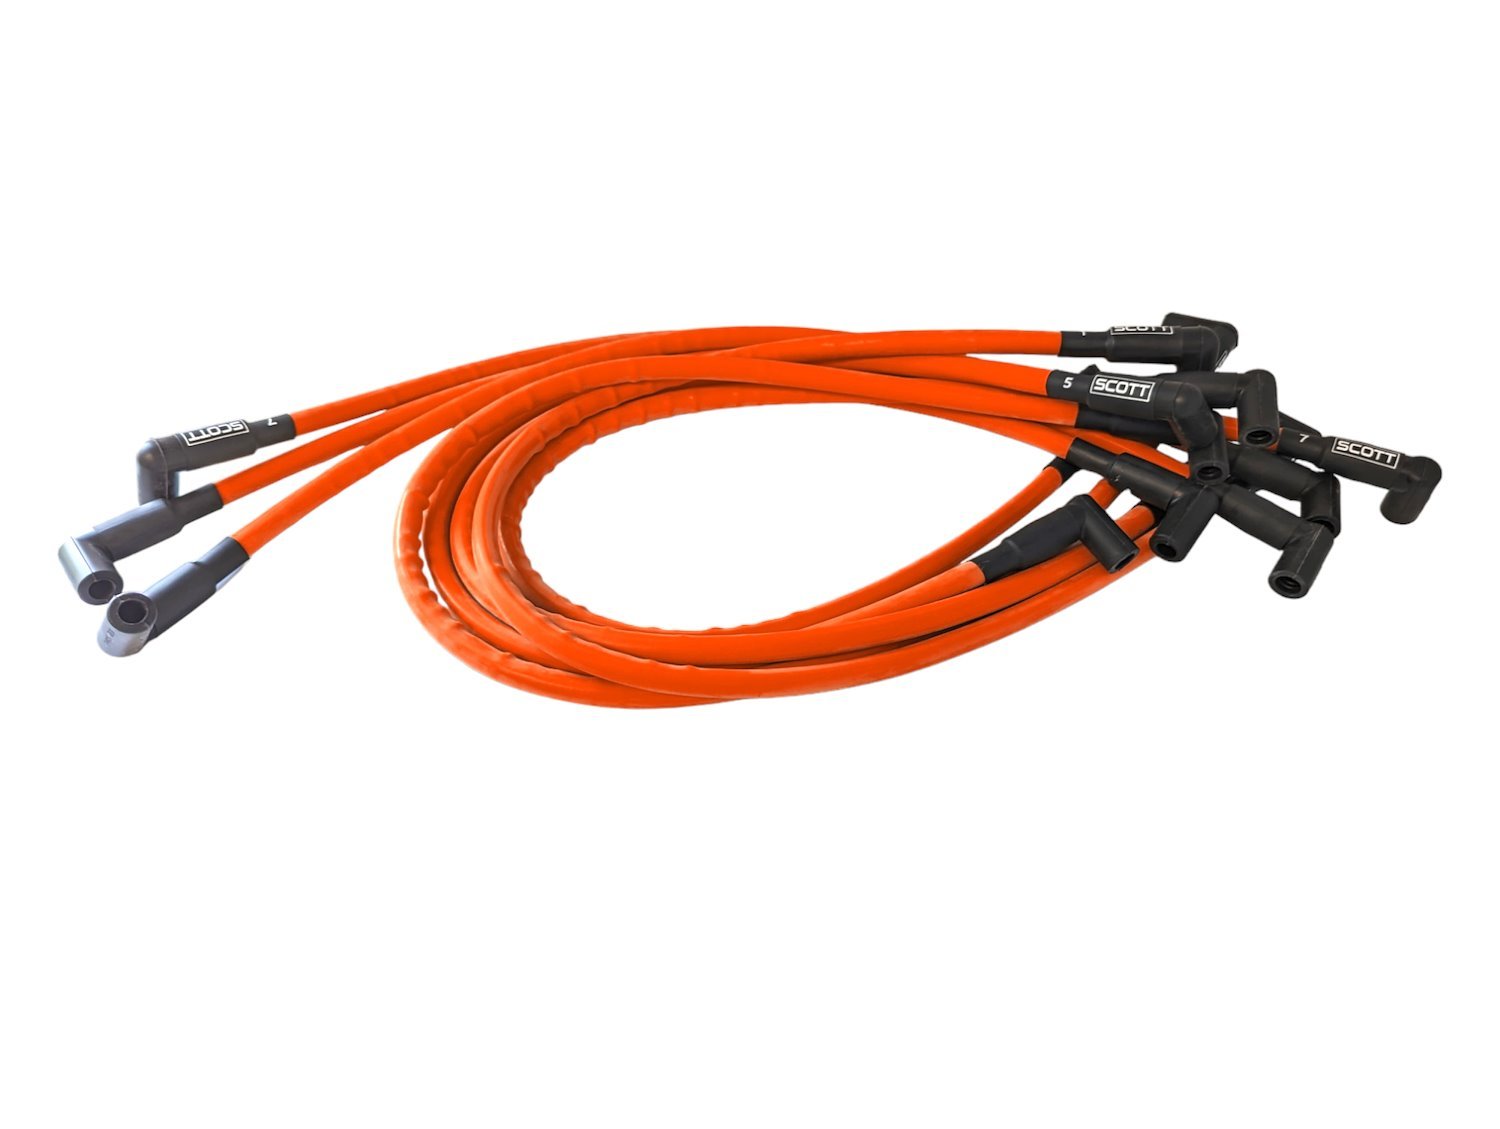 SPW300-CH-402-9 Super Mag Fiberglass-Oversleeved Spark Plug Wire Set for Small Block Chevy, Over Valve Cover [Orange]